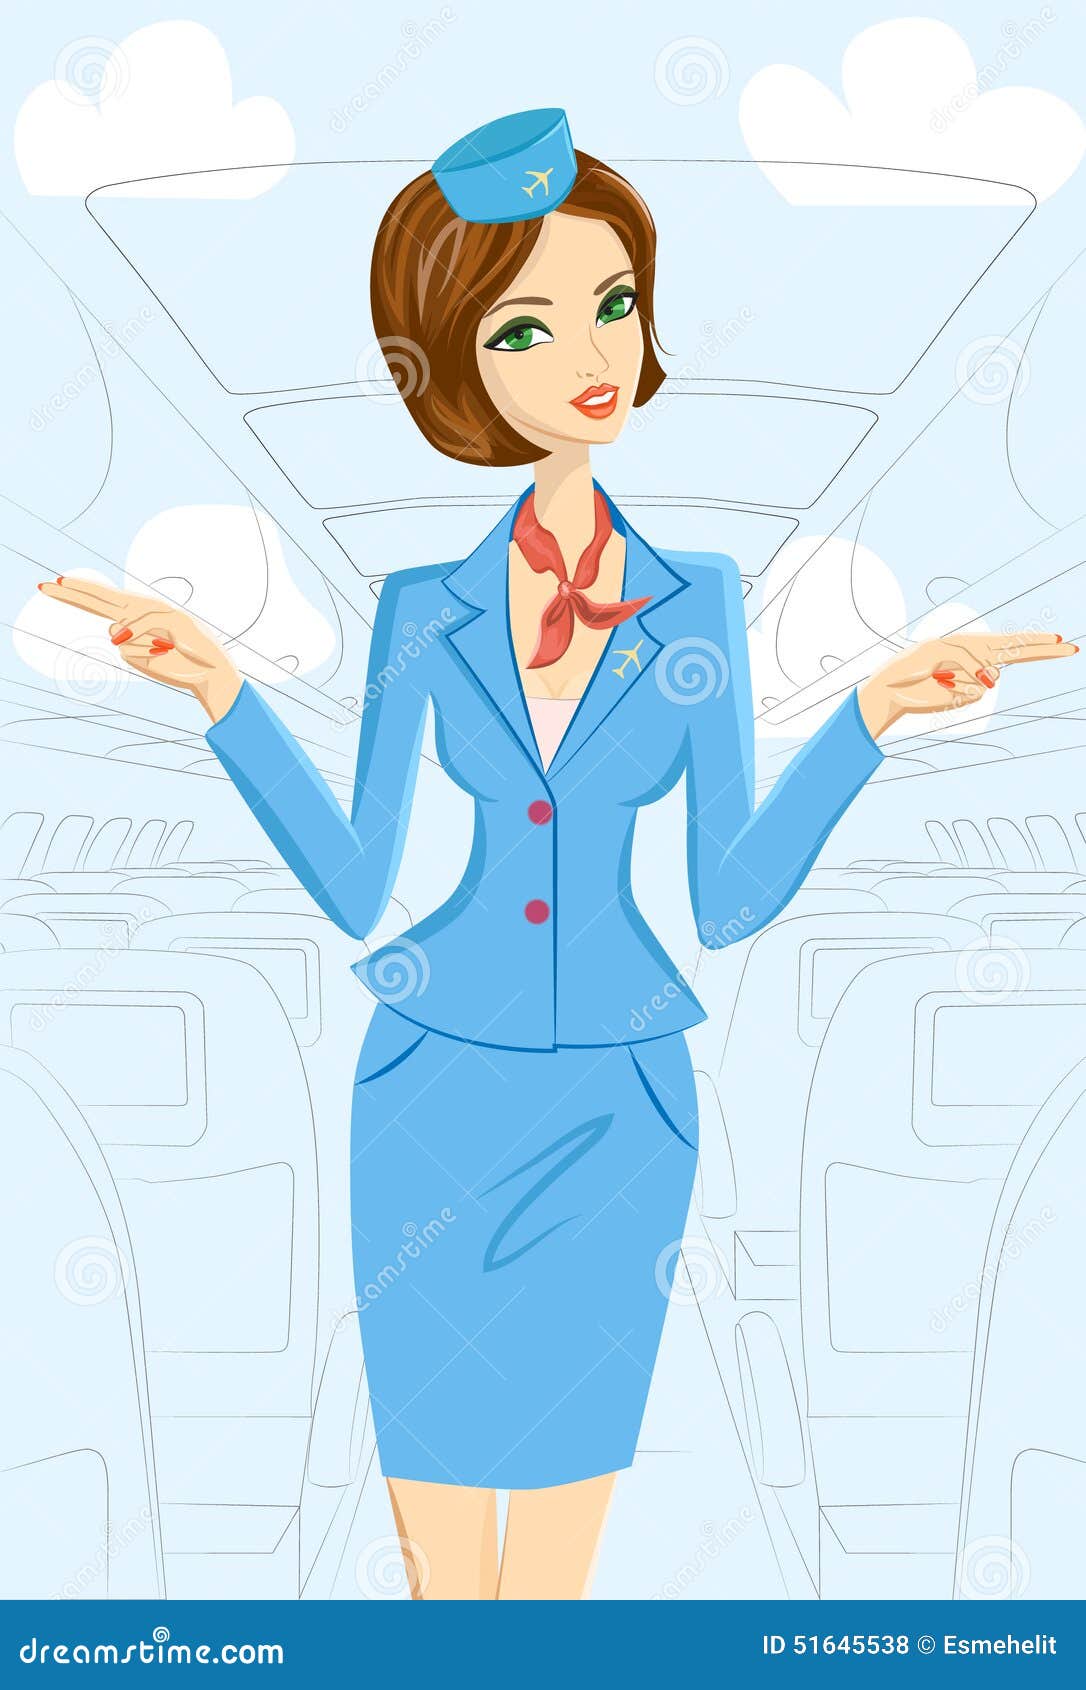 smiling flight attendant showing emergency exits on plane